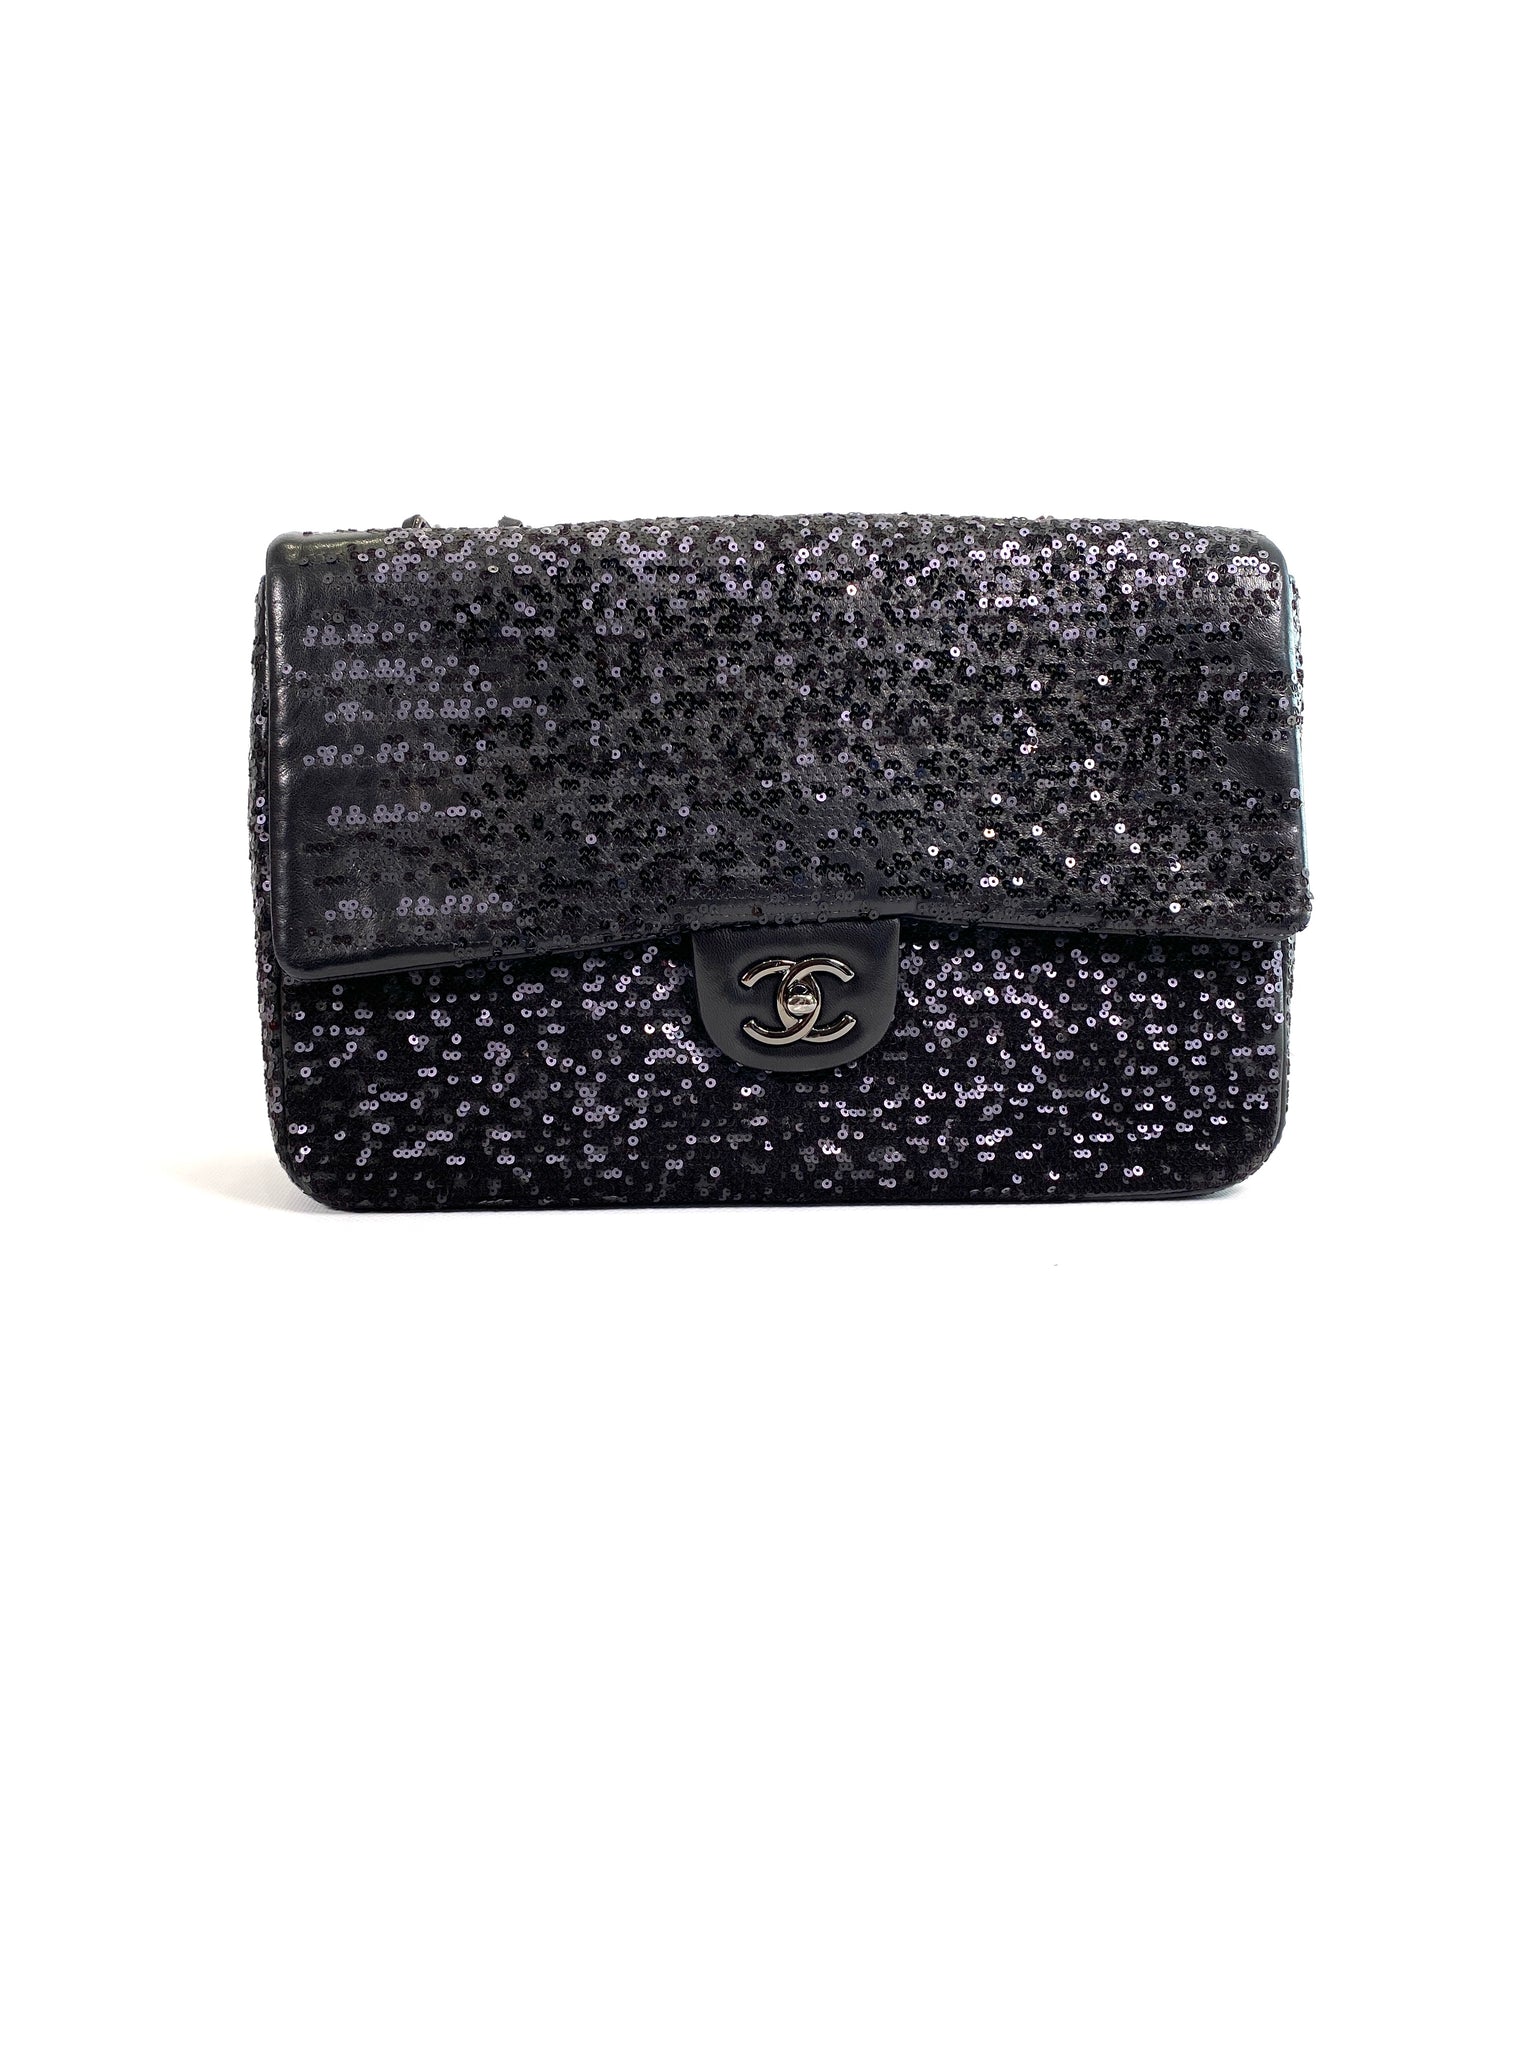 Chanel Flap Bag with Coin Purse Black